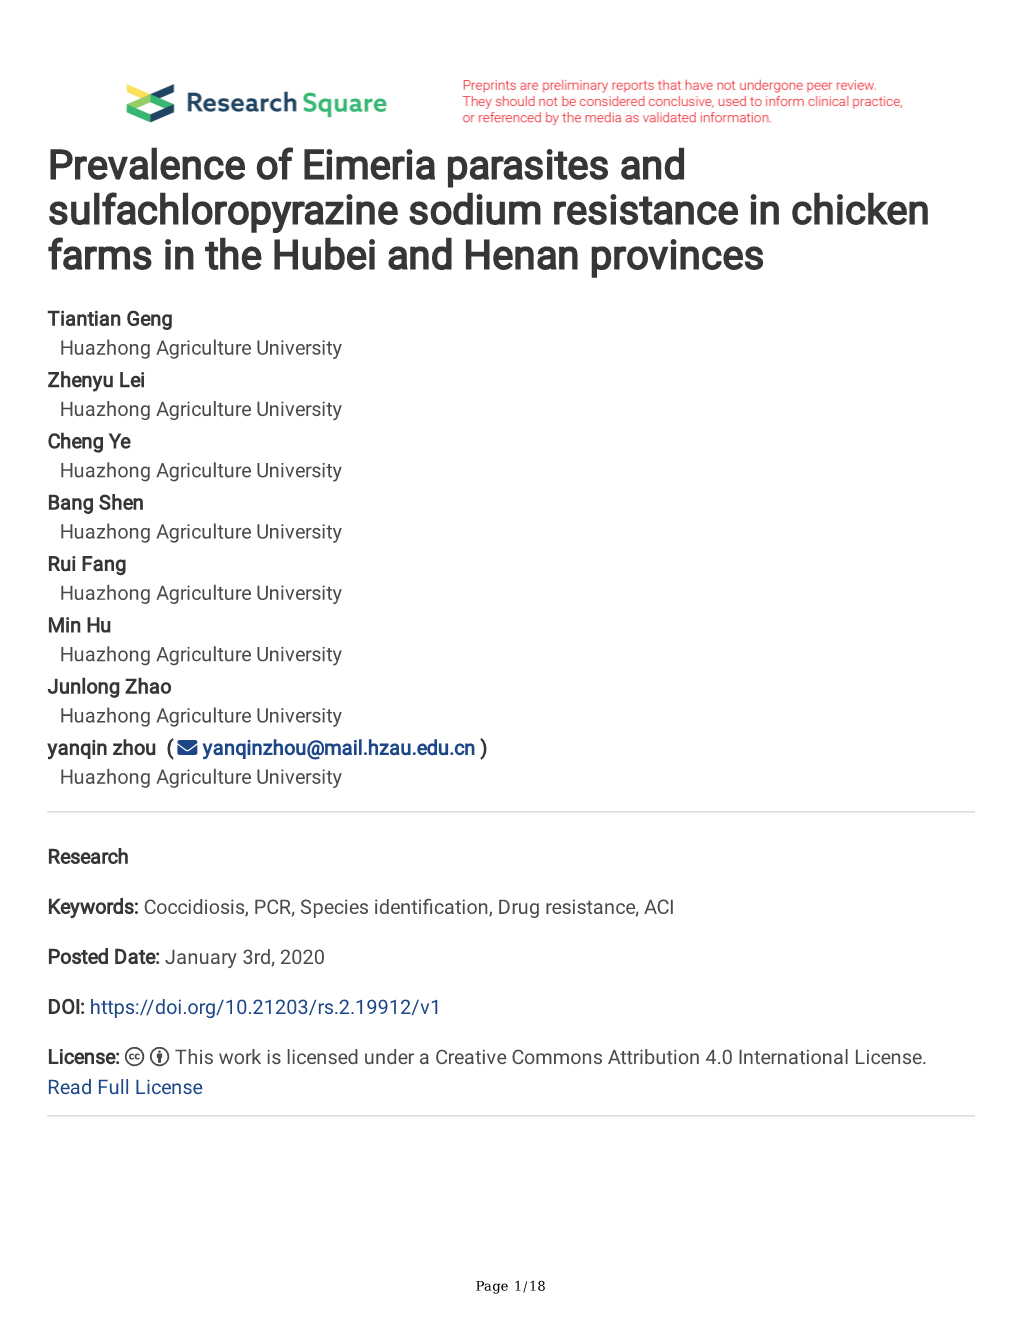 Prevalence of Eimeria Parasites and Sulfachloropyrazine Sodium Resistance in Chicken Farms in the Hubei and Henan Provinces